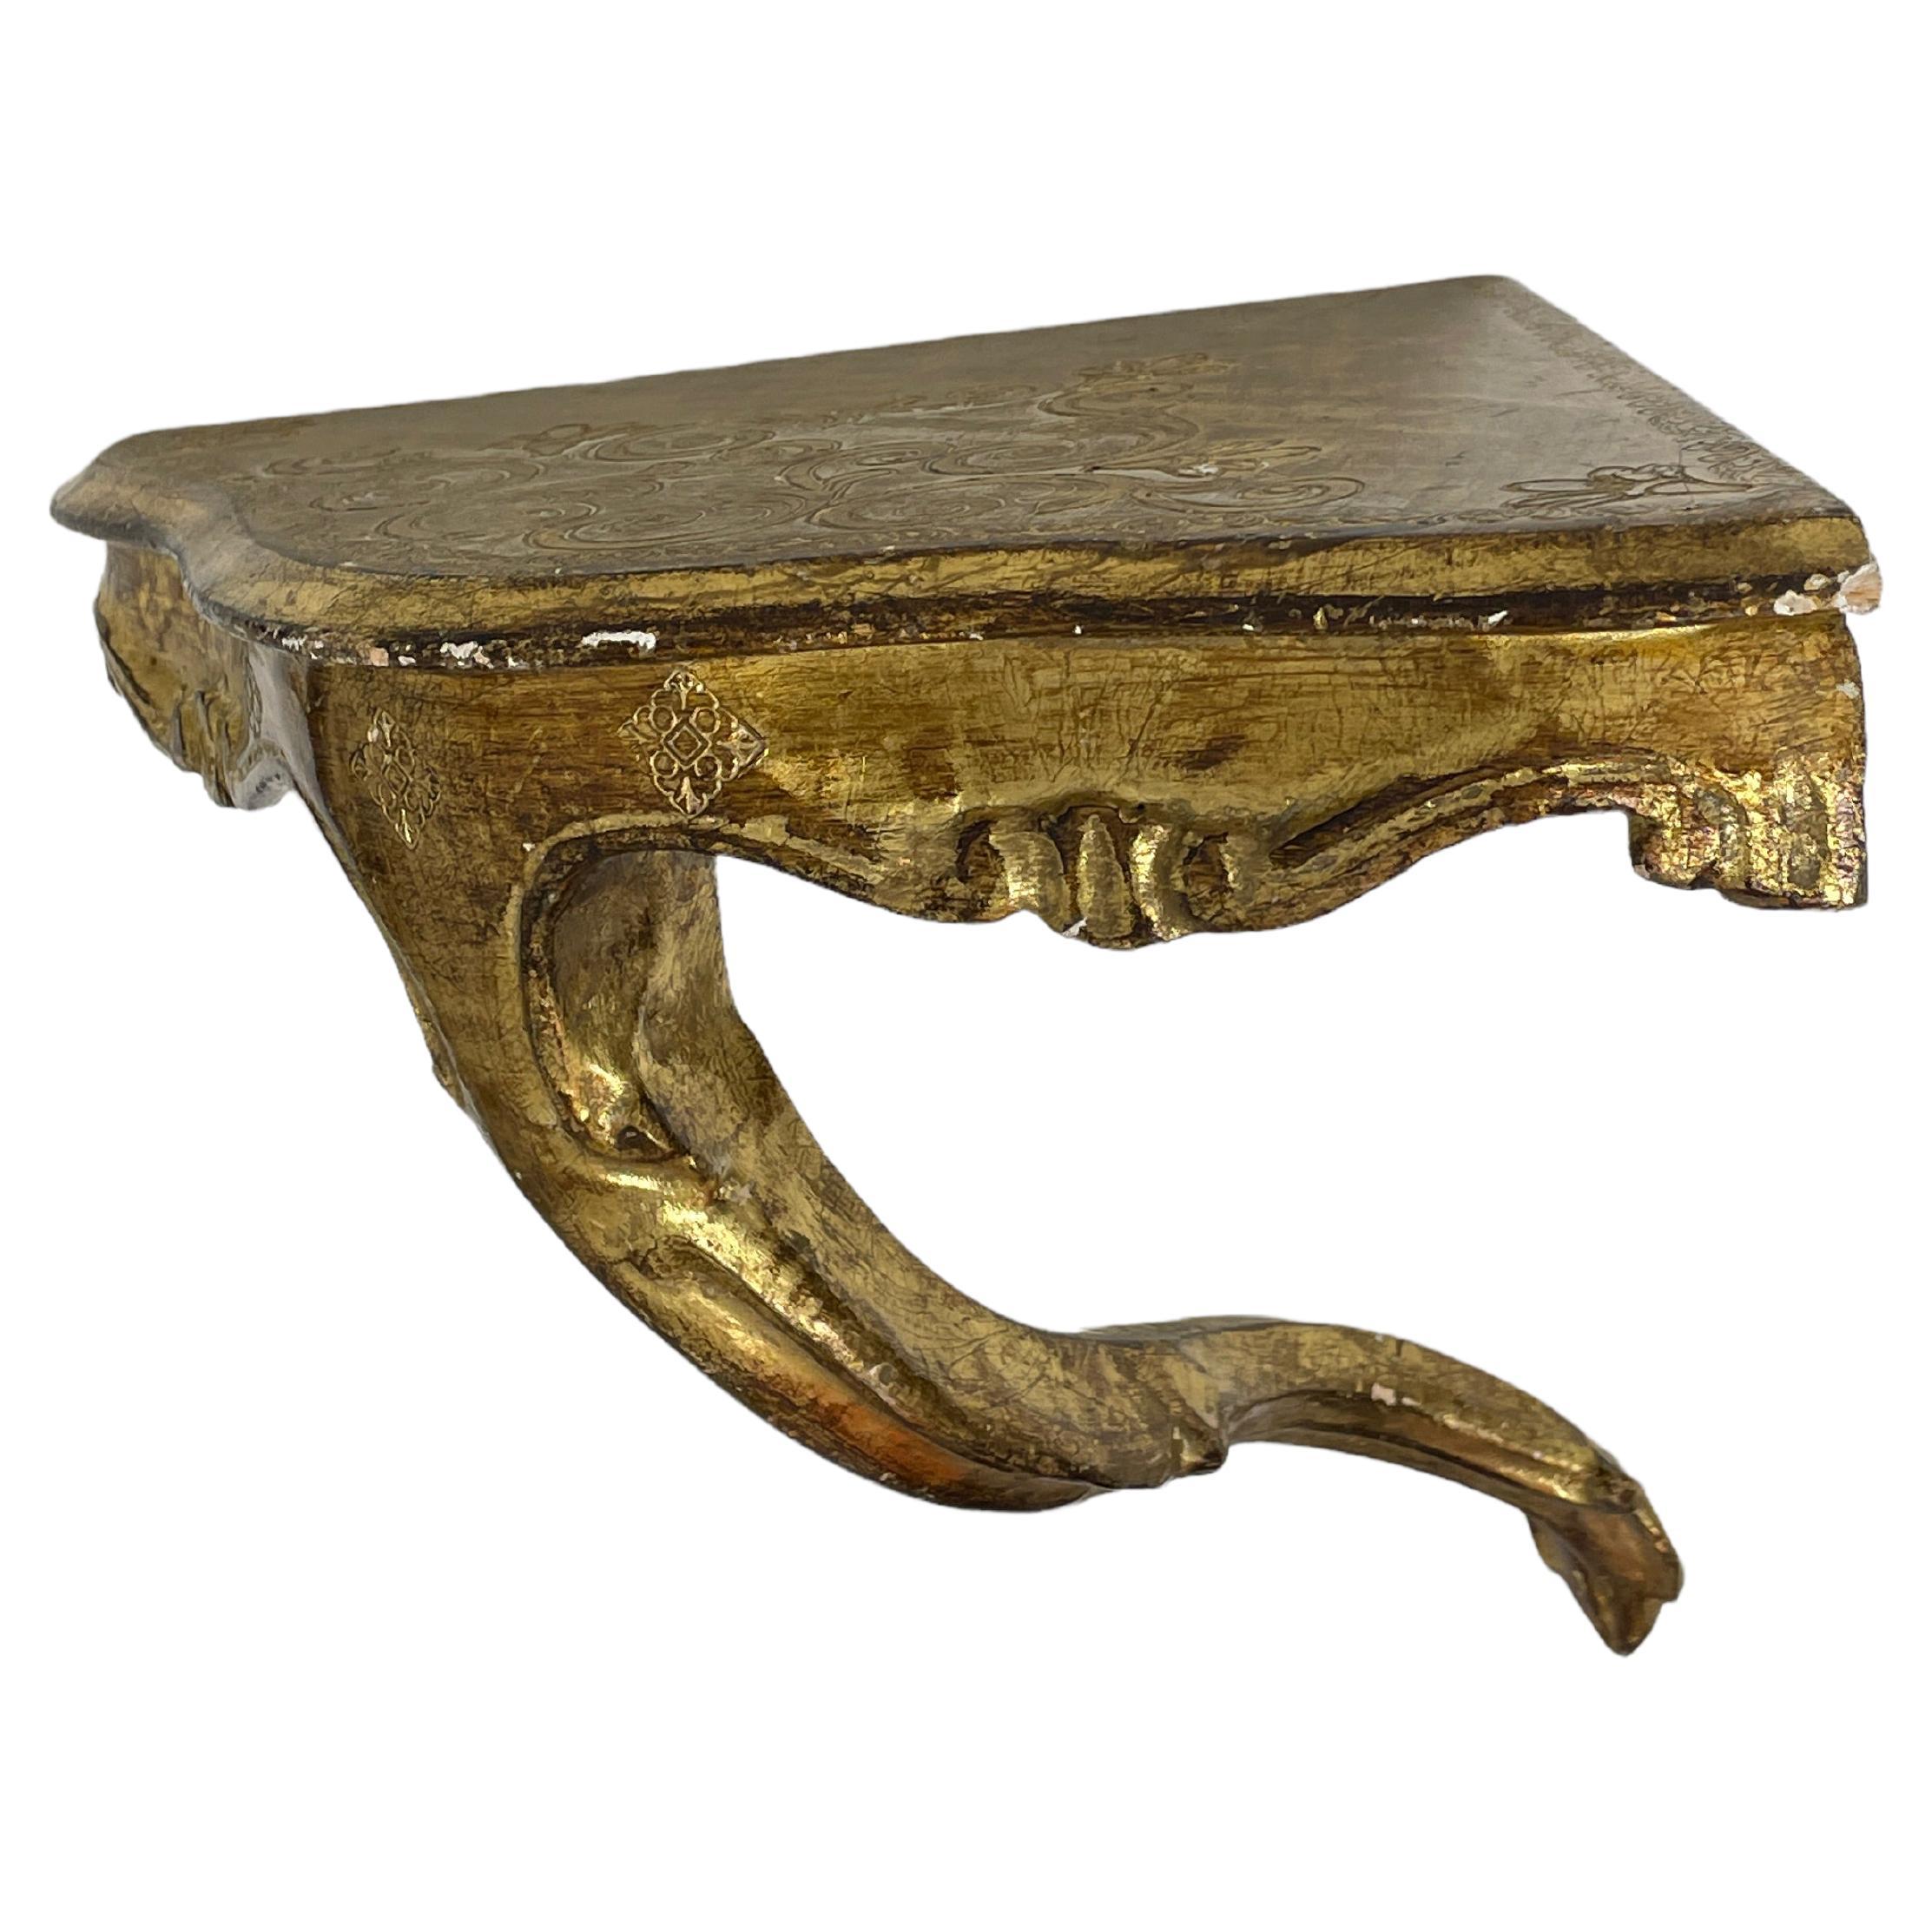 Vintage Florence Wall Corner Shelf Console, Gilded Carved Wood, Florentine Style For Sale